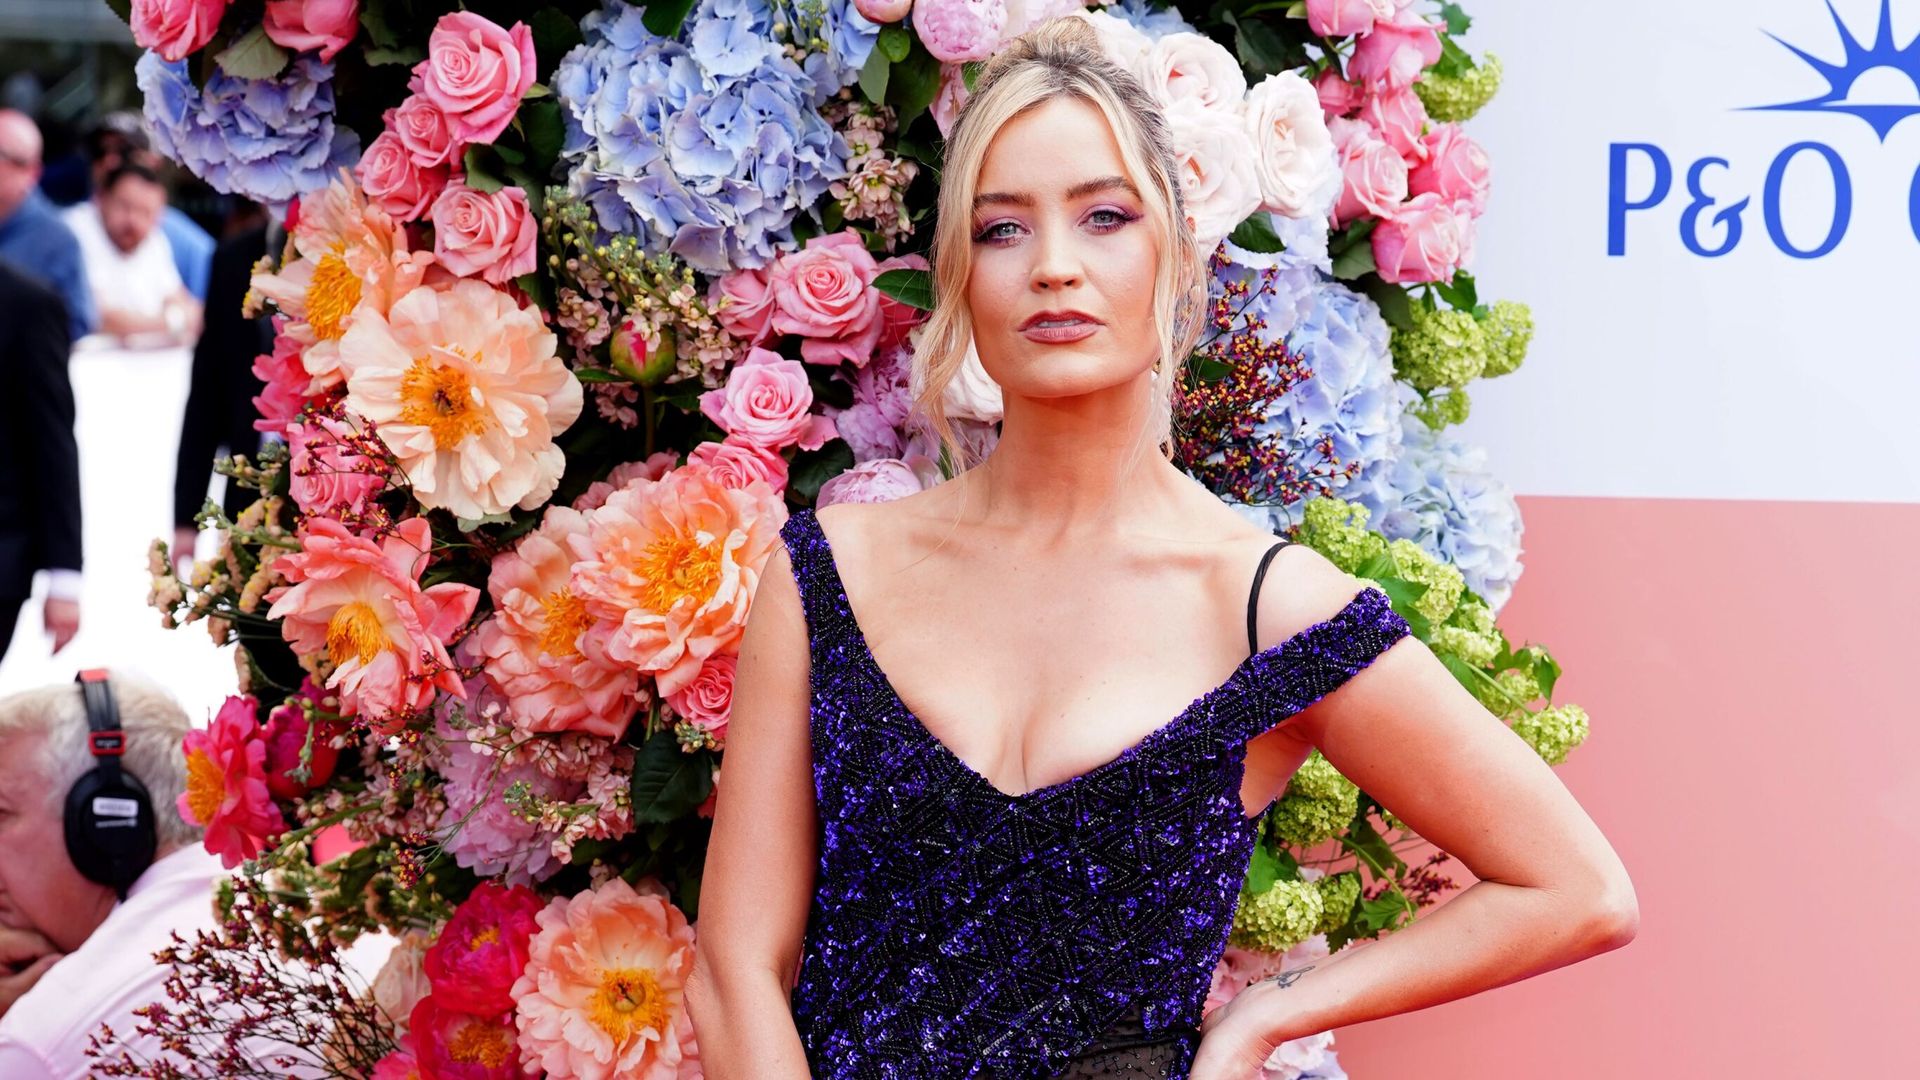 Laura Whitmore alleges 'inappropriate behaviour' during her time on Strictly